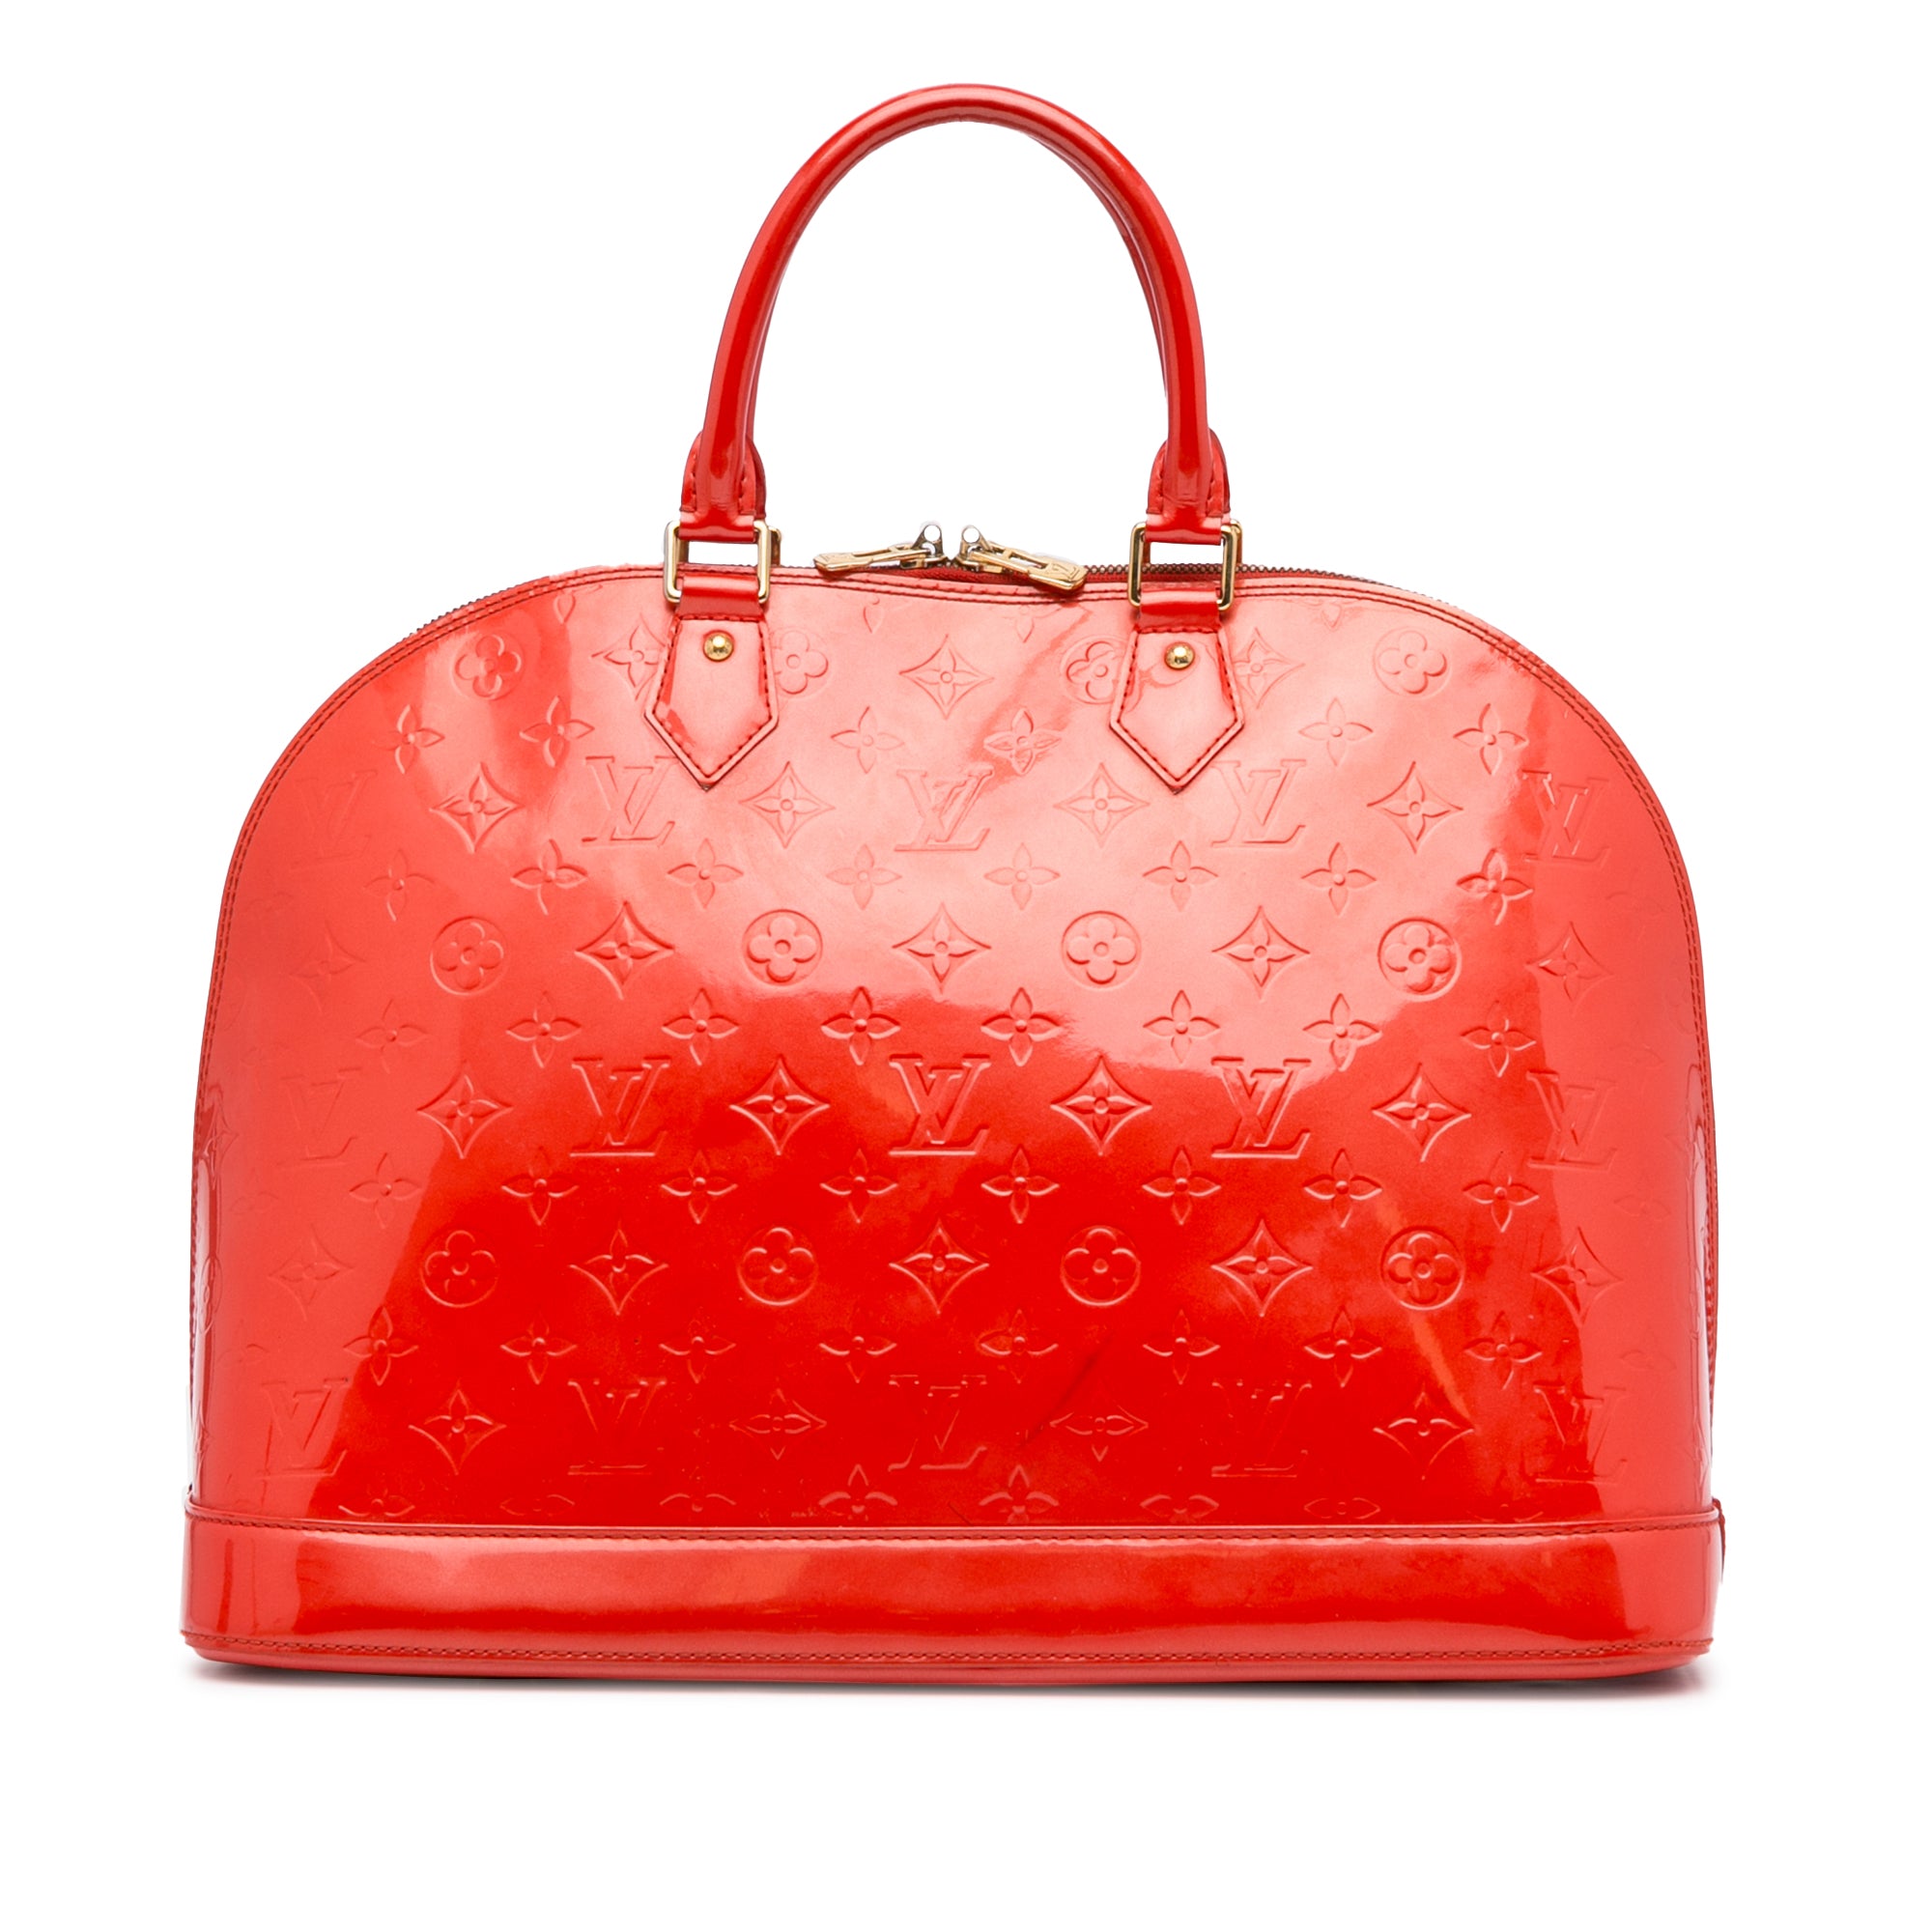 How to dye Louis Vuitton Vernis Leather Bag 